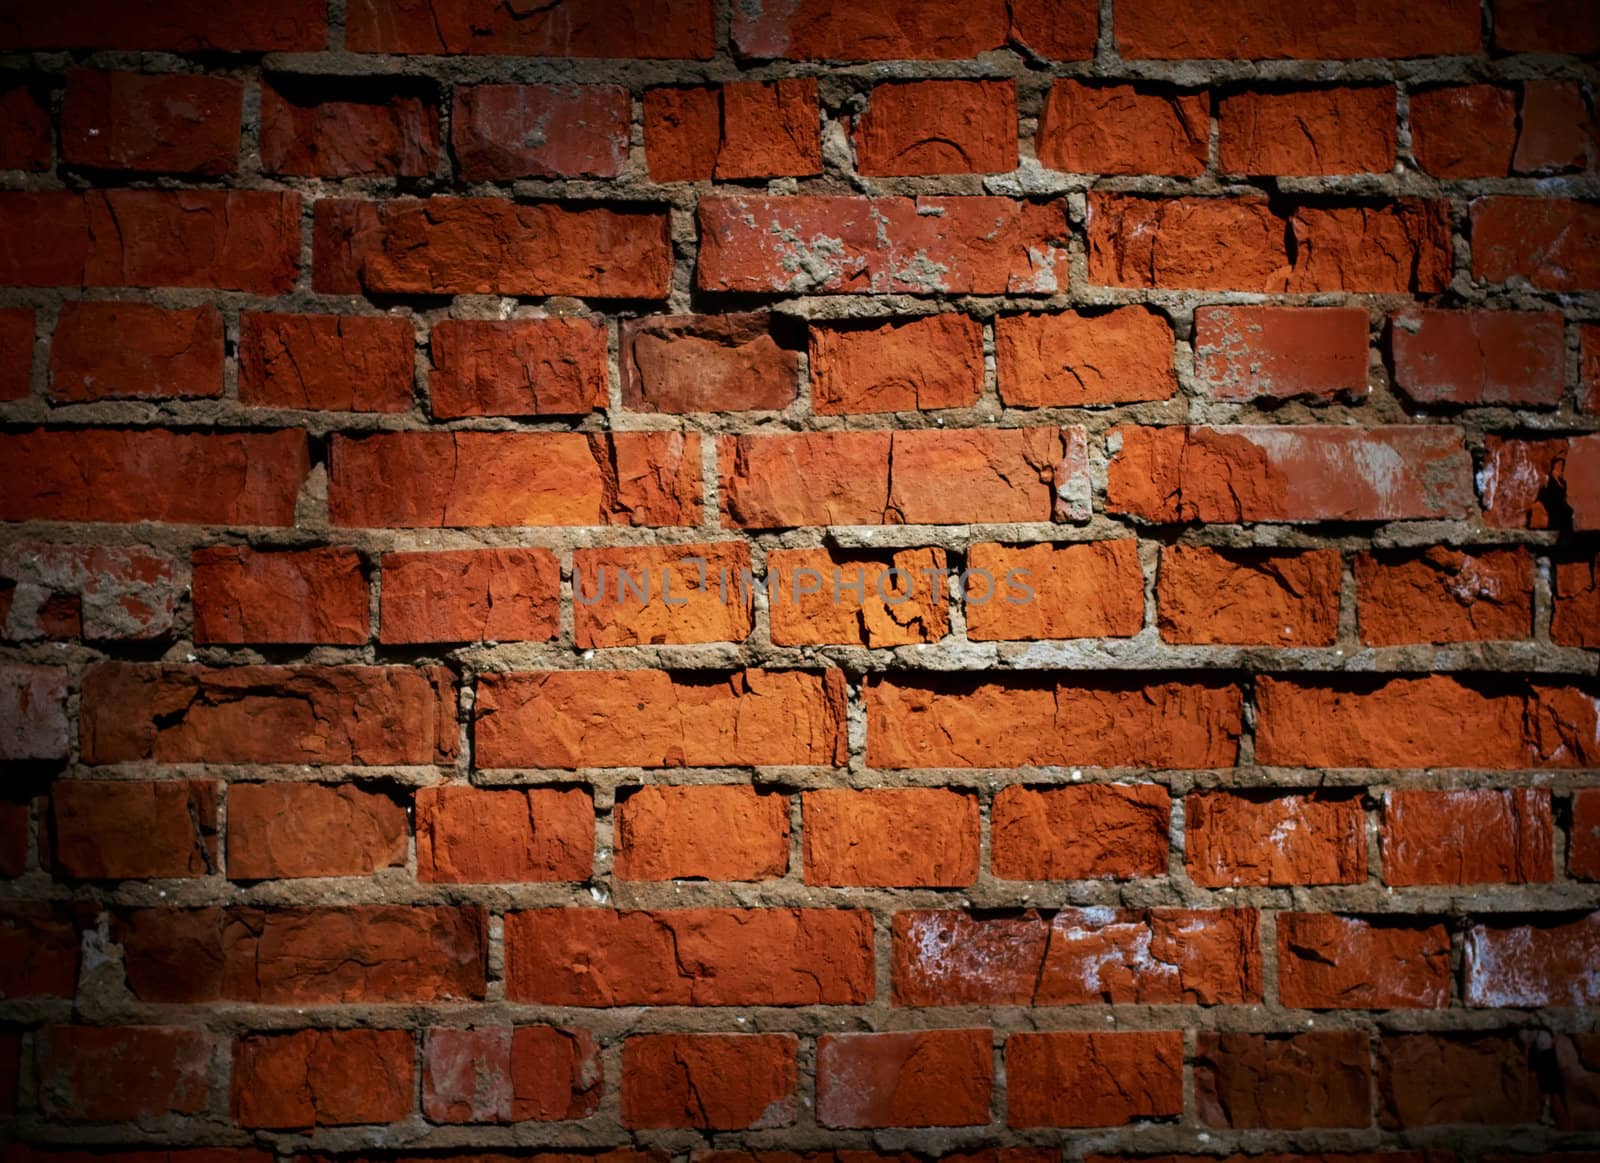 Weathered stained old brick wall background 